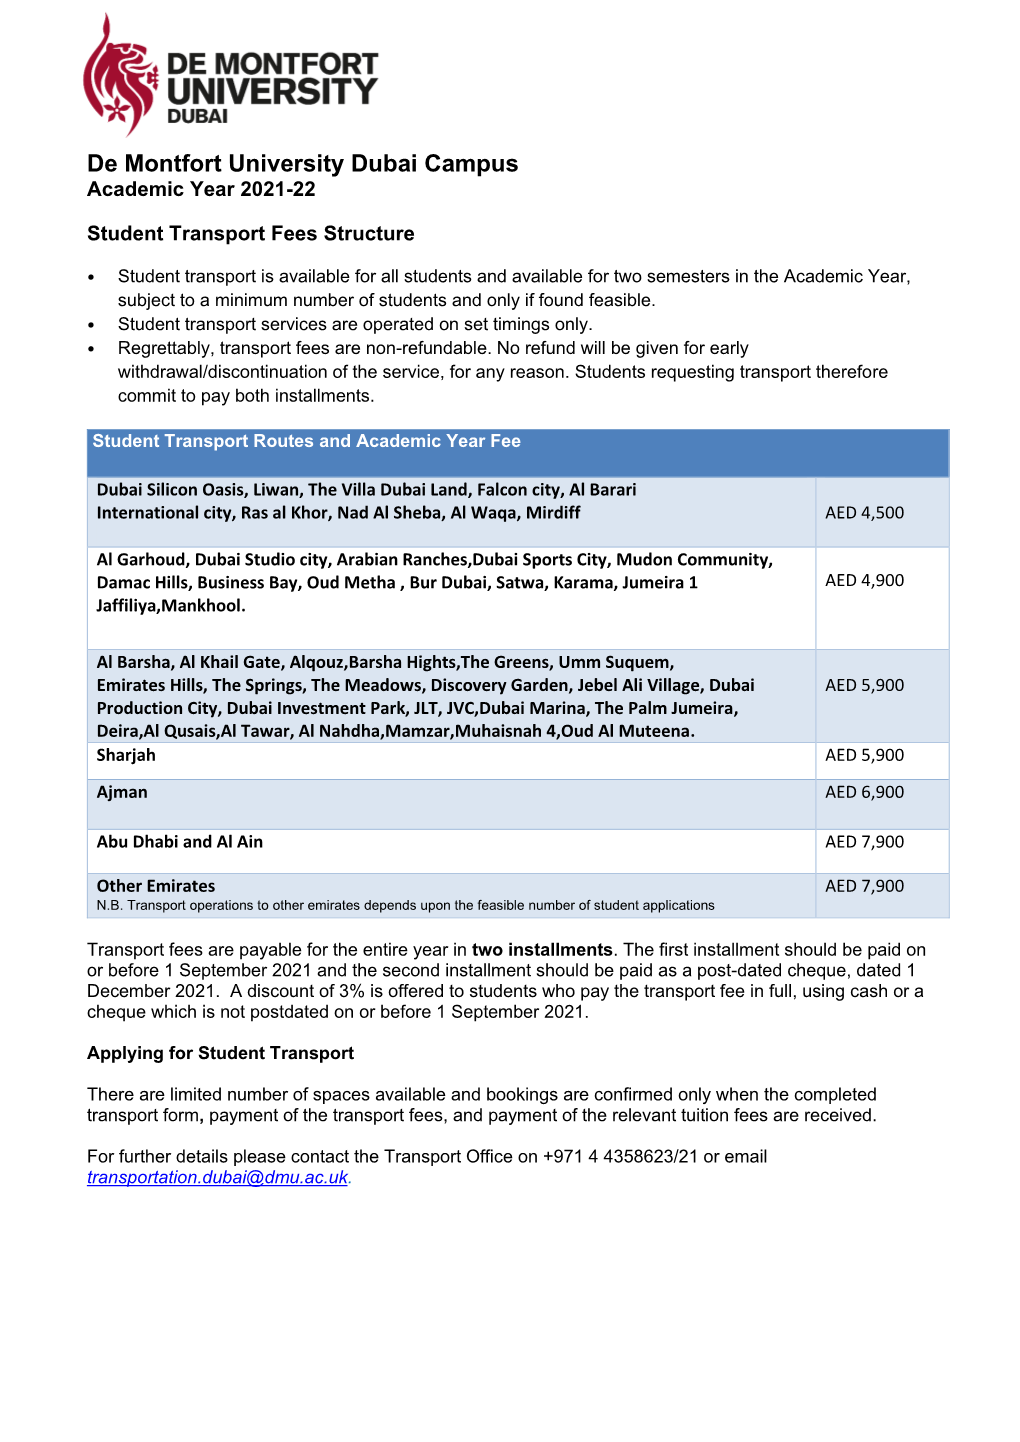 Academic Year 2021-22 Student Transport Fees Structure